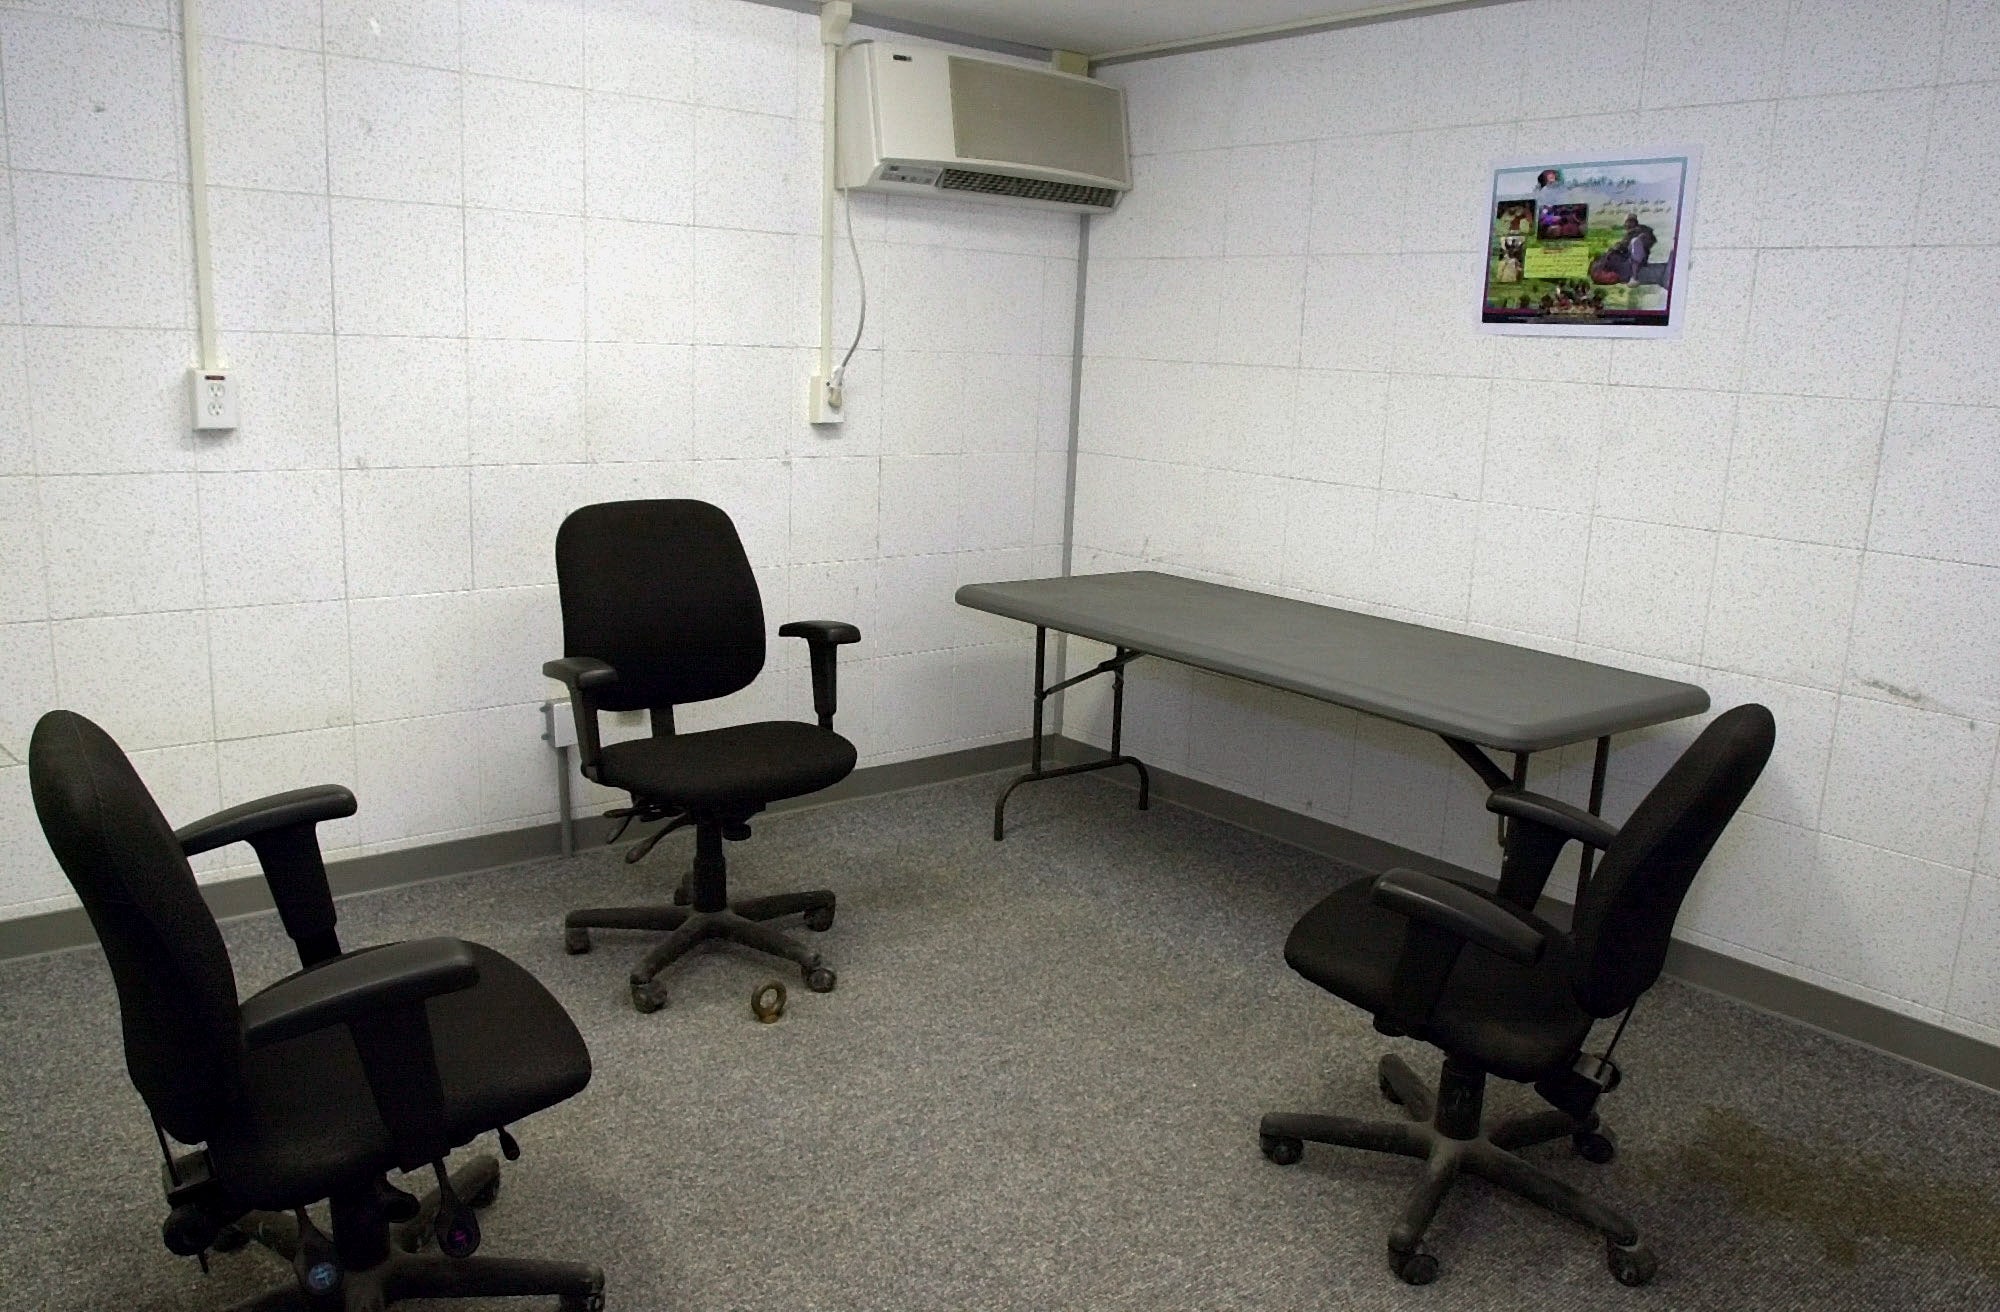 Slahi was interrogated in a facility like this one at Camp Delta in Guantanamo Bay